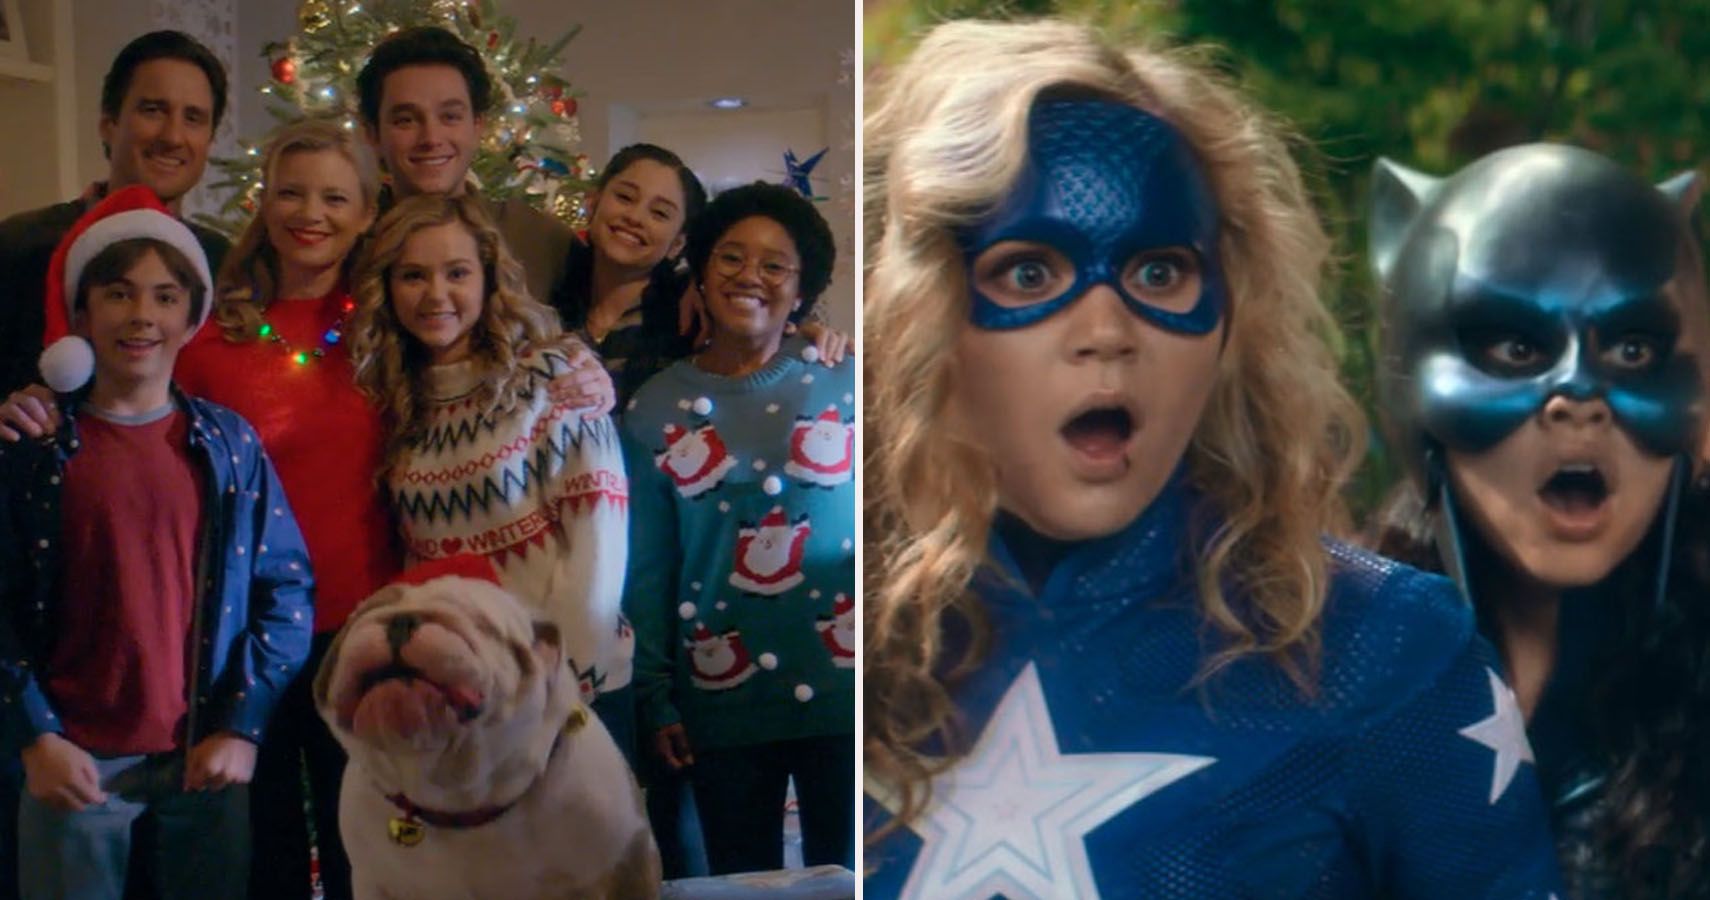 split image. Left side family photo of justice society, right side stargirl and wildcat.